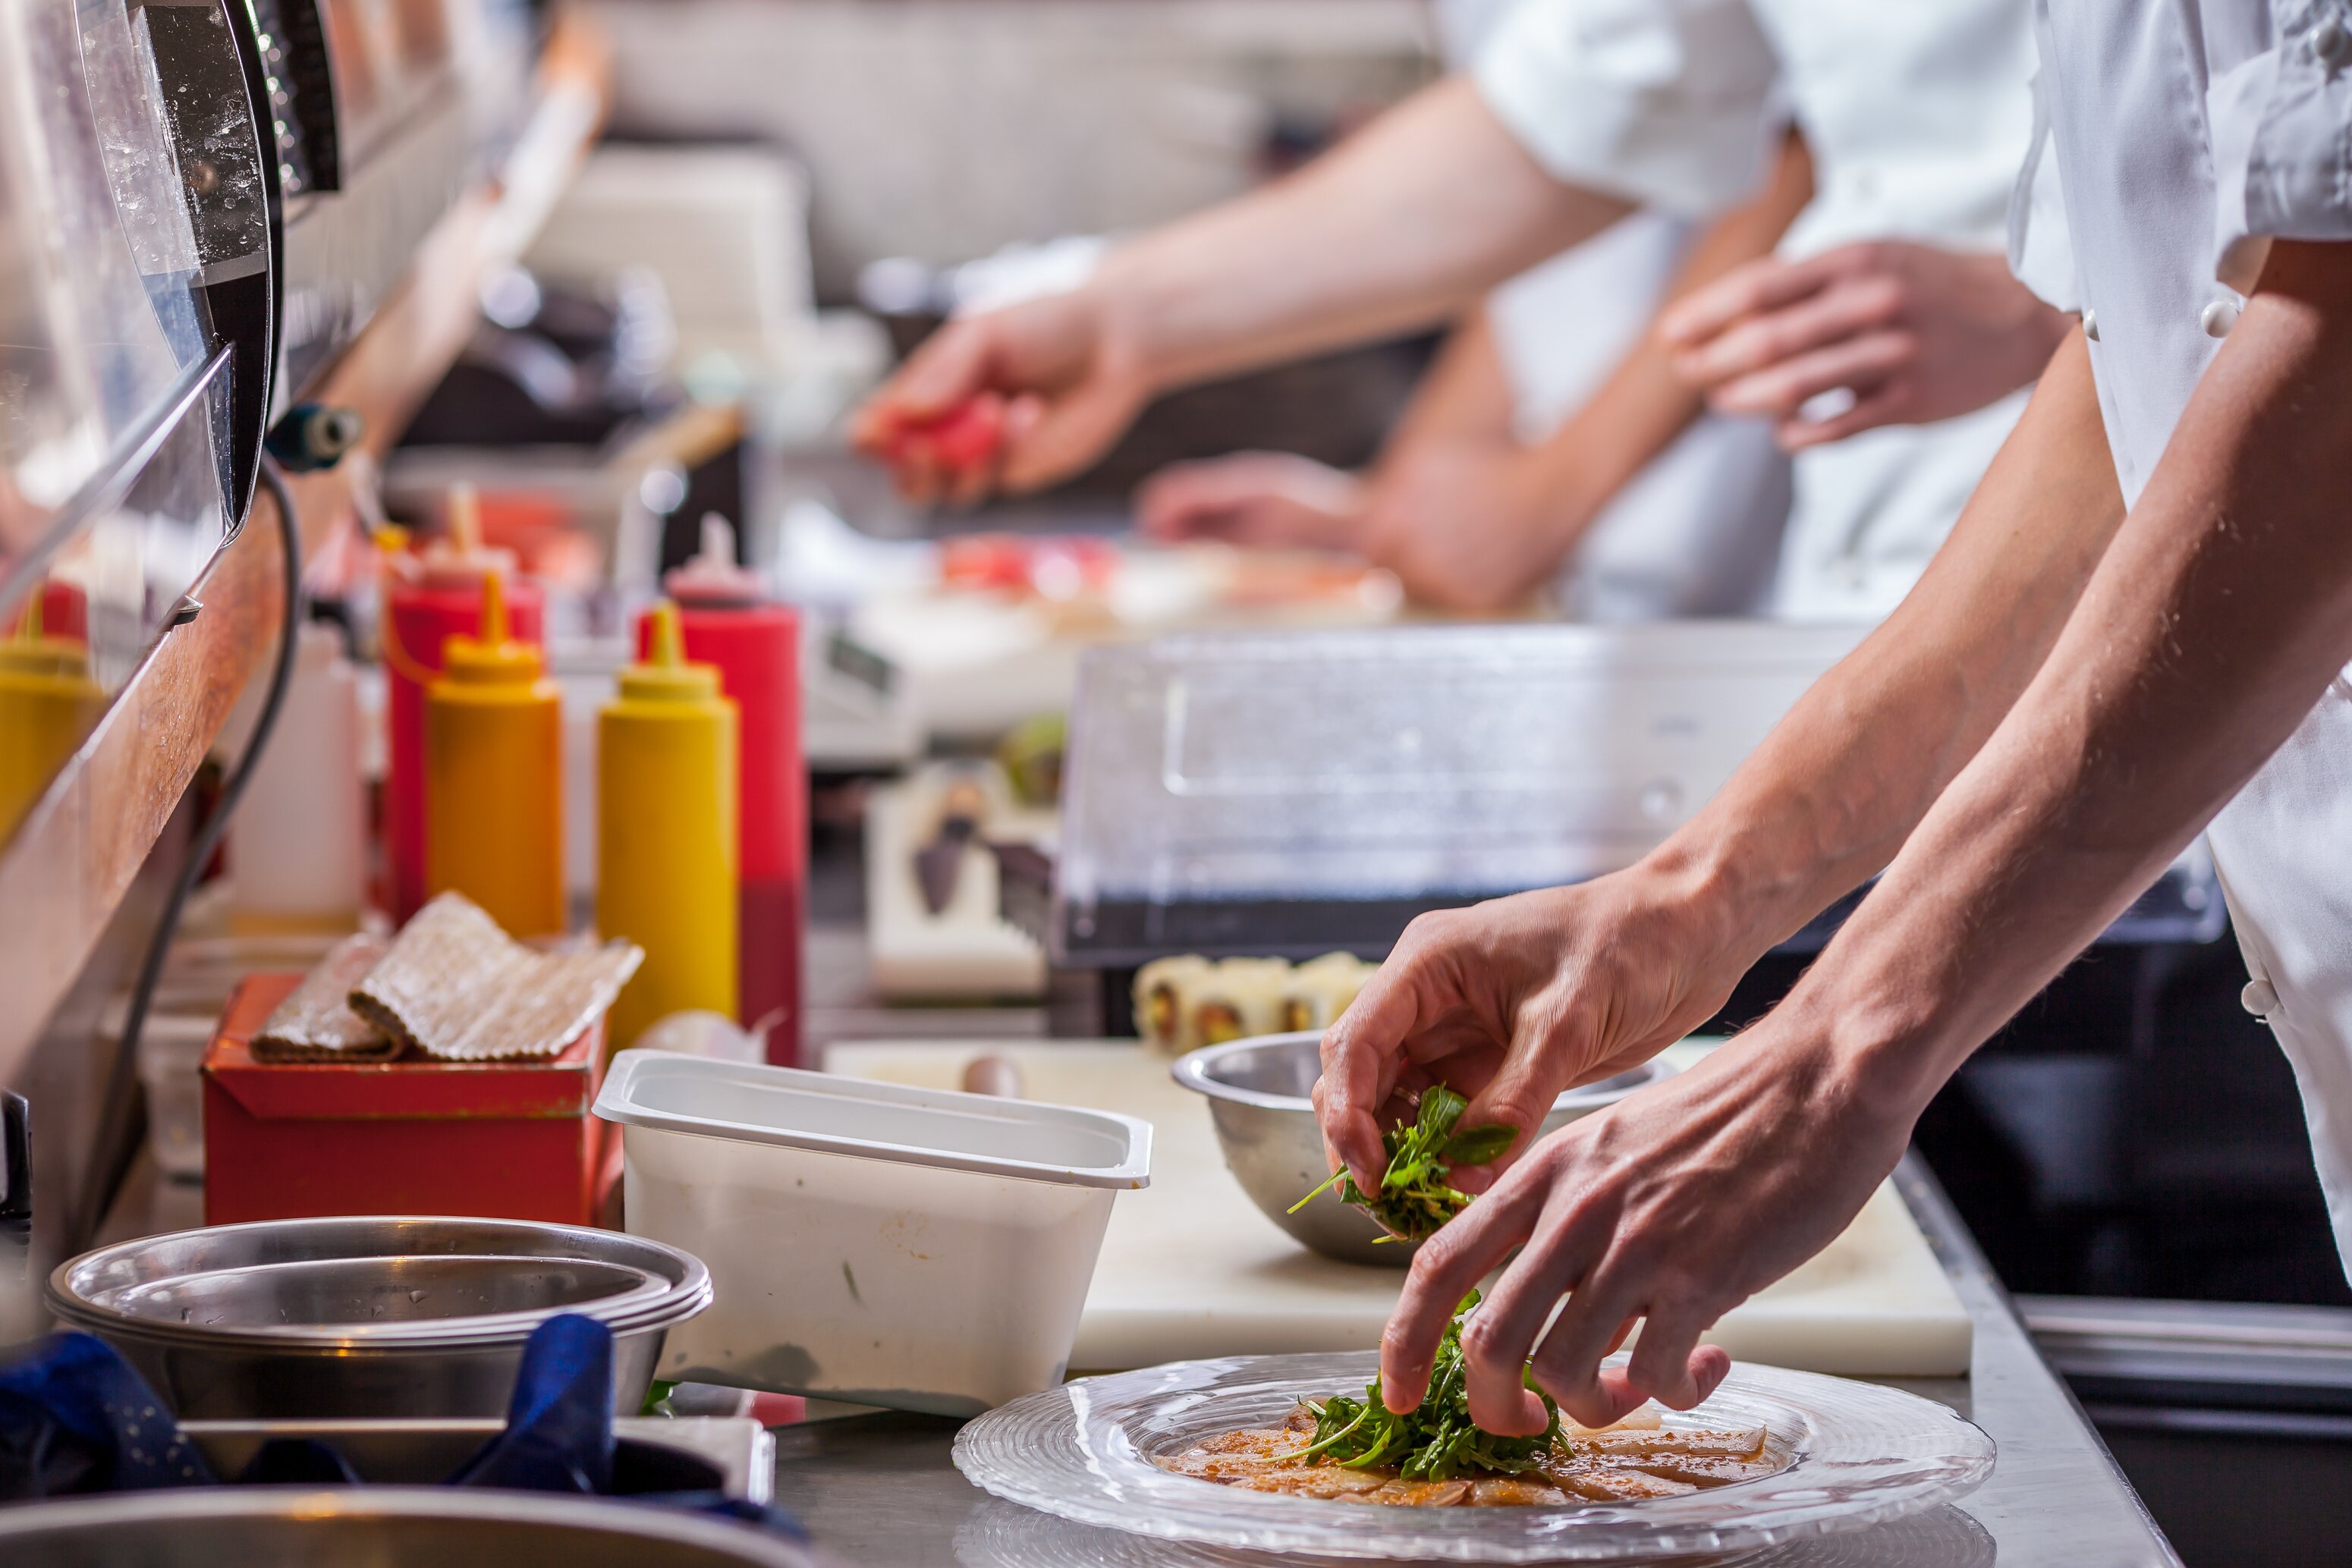 Proportion of EU workers in hospitality sector at lowest level since 2016